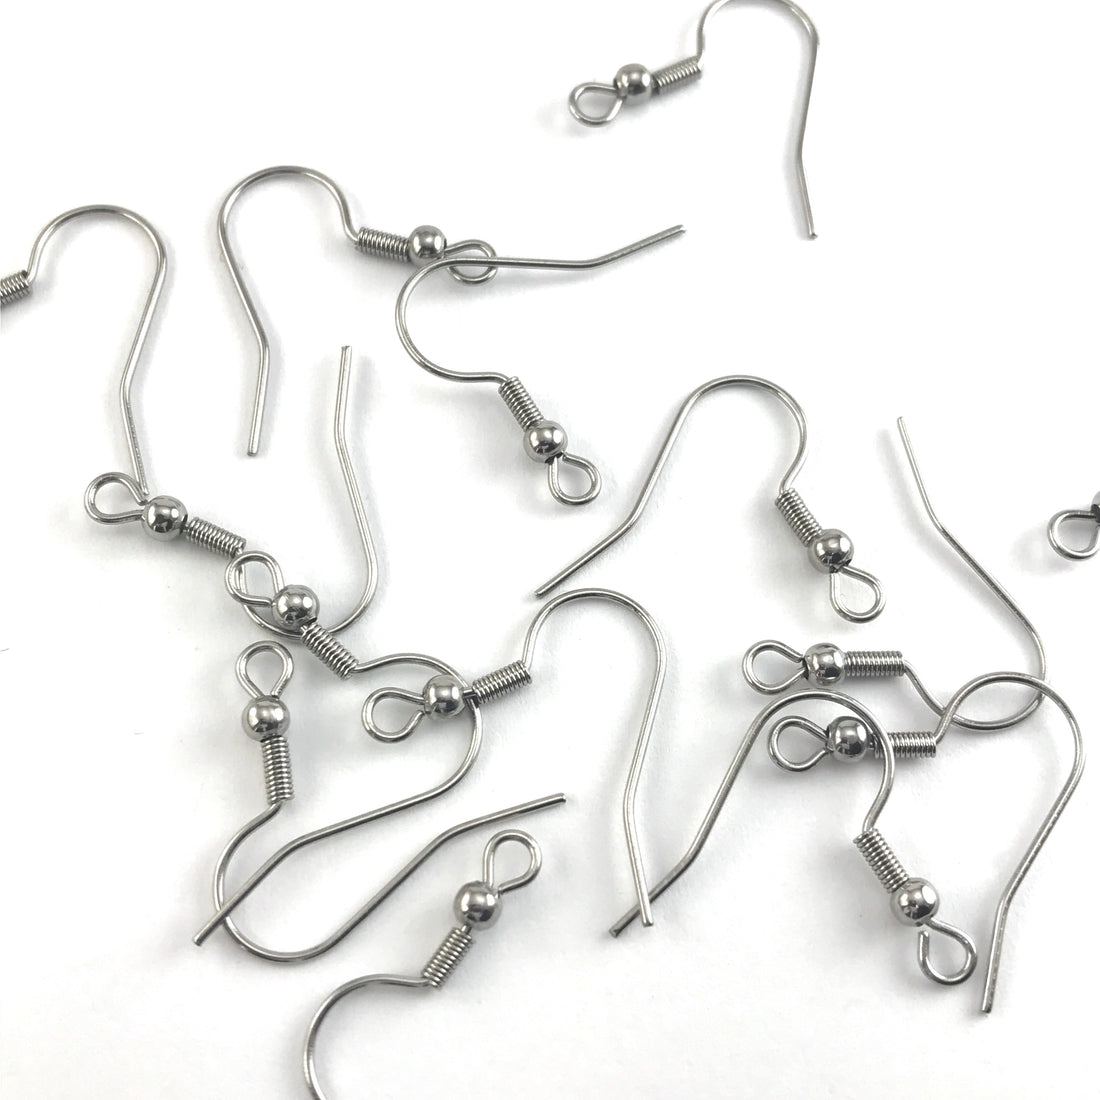 Stainless Steel Earring Hooks, Silver Colour 21mm - 40 Pack – Easy Crafts